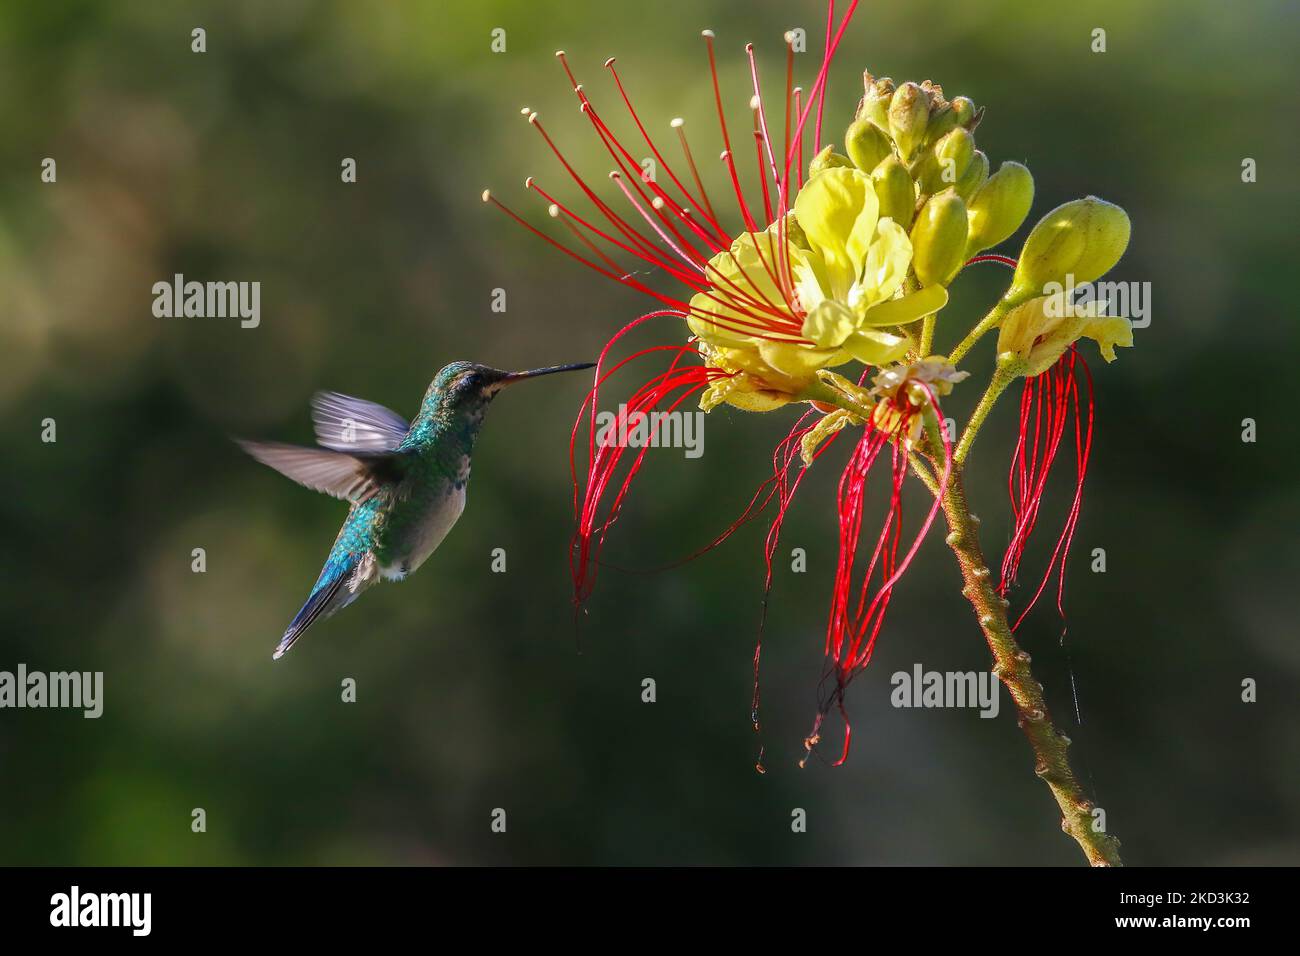 A closeup of a Broad-billed Hummingbird touching a Erythrostemon gilliesii plant with its beak Stock Photo